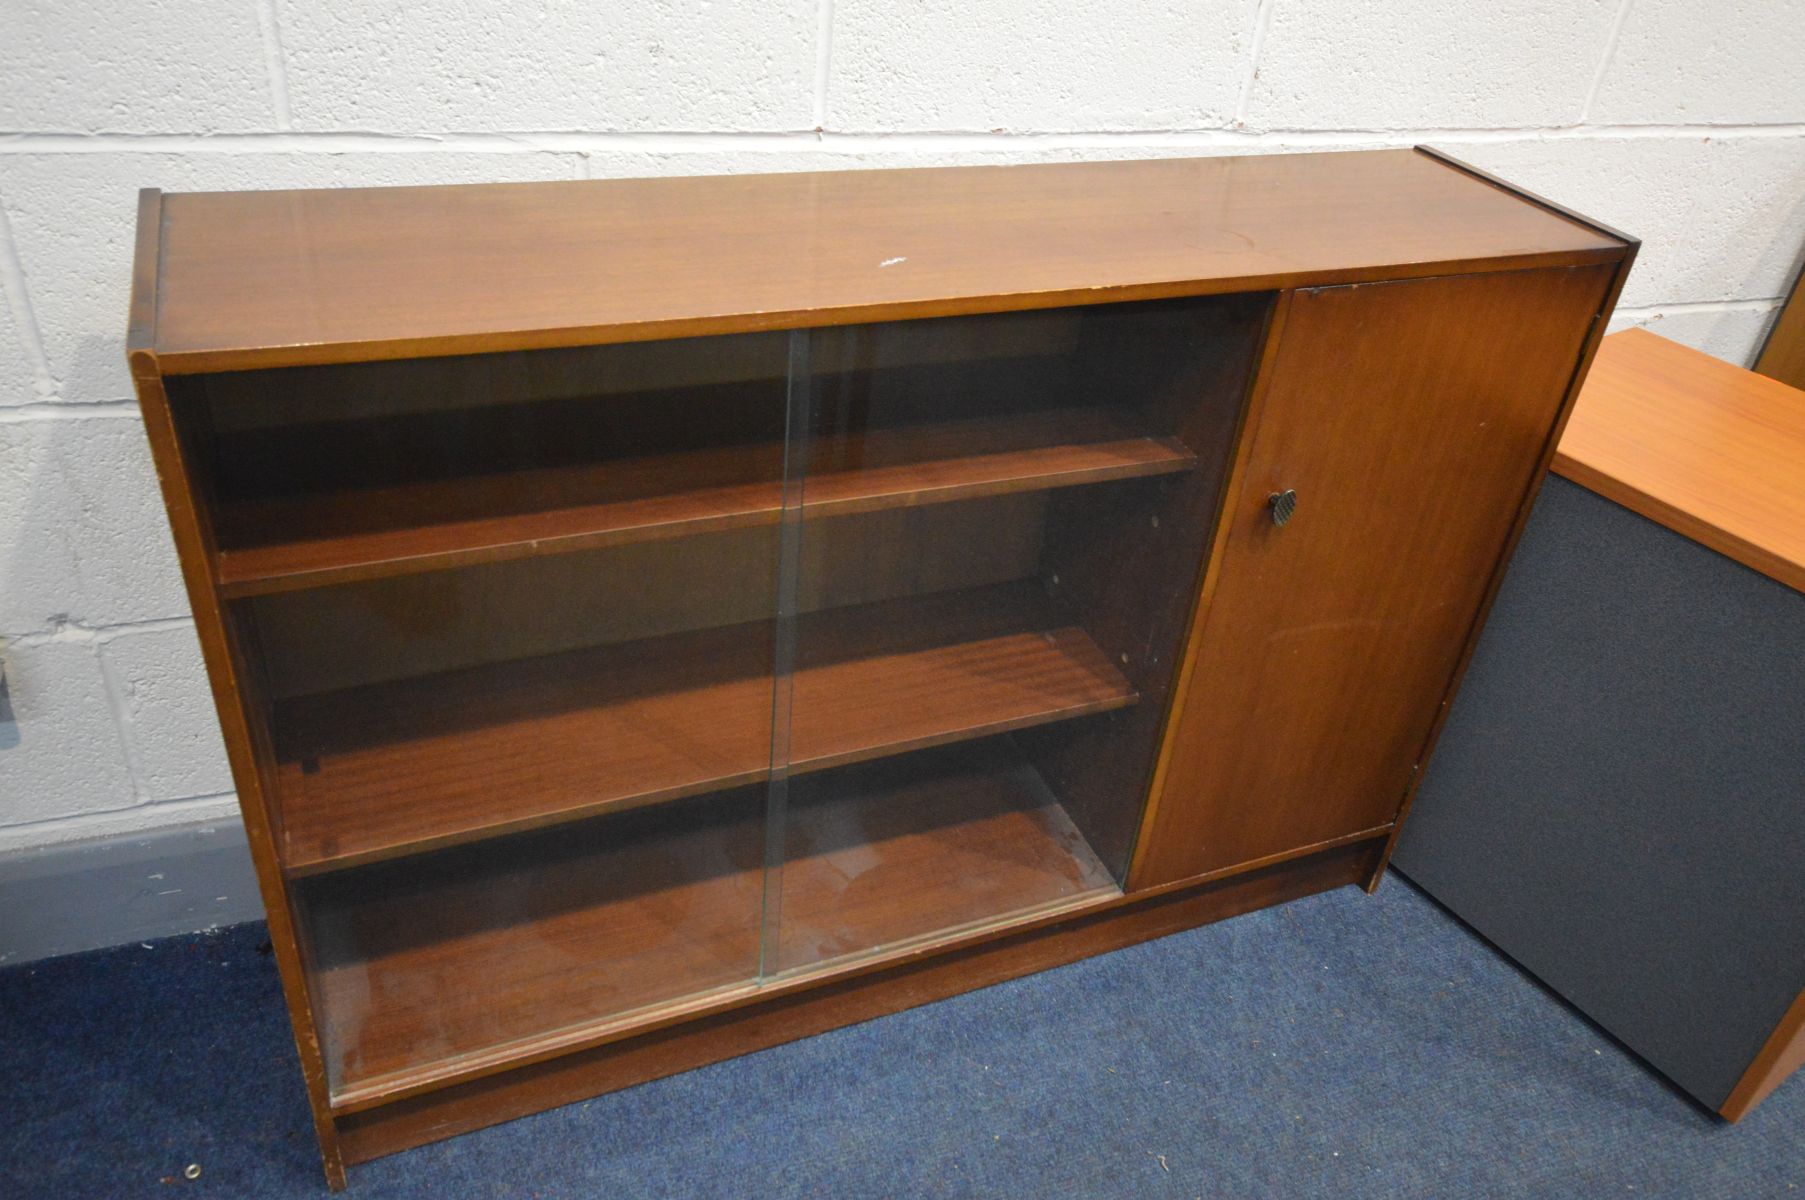 A QUANTITY OF TEAK FURNITURE comprising a teak display case, with four glass shelves and internal - Image 4 of 4